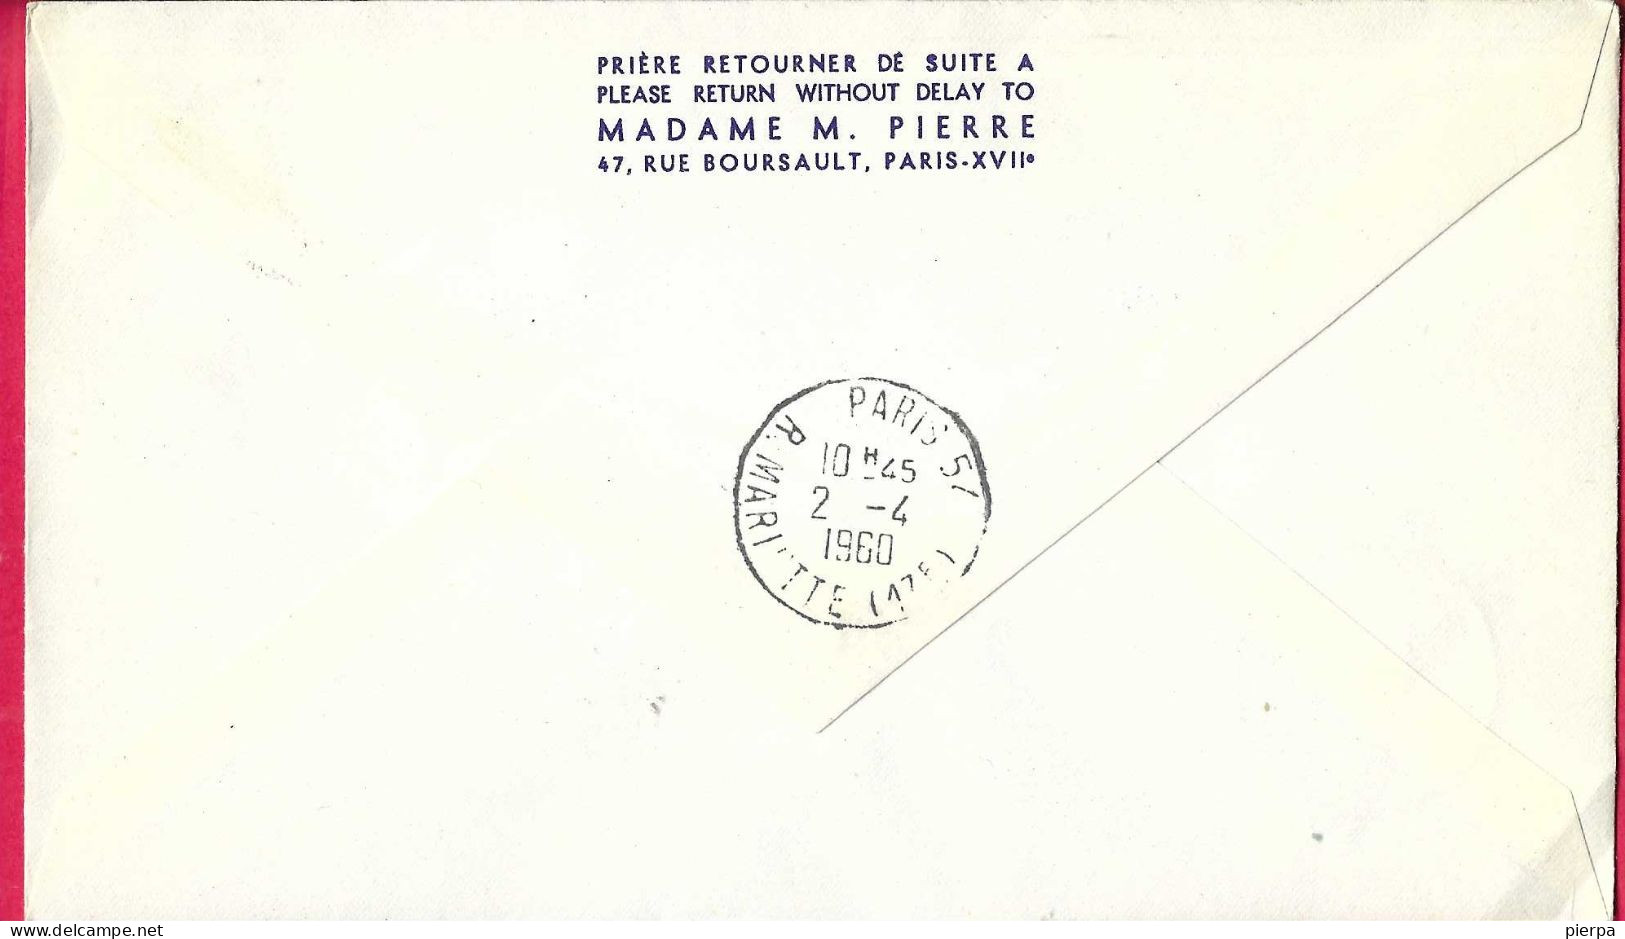 SVERIGE - FIRST CARAVELLE FLIGHT AIR FRANCE FROM STOCKHOLM TO PARIS *1.4.1960* ON OFFICIAL COVER - Cartas & Documentos